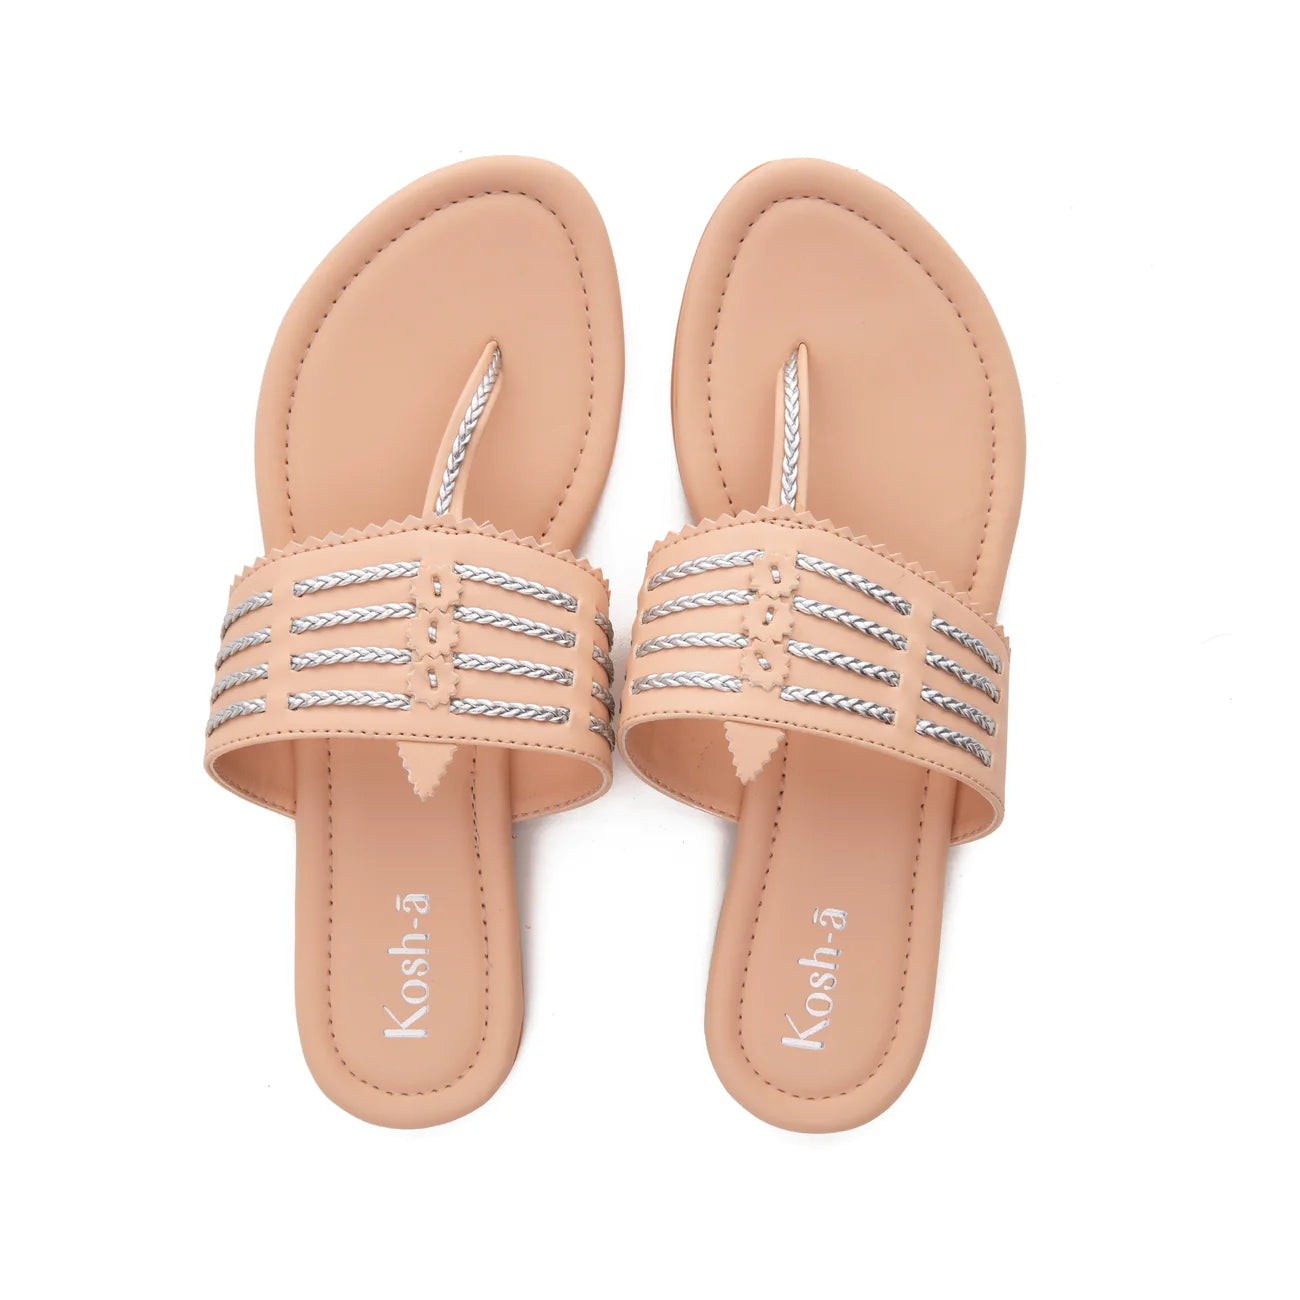 Peach And Silver Flats For Women in USA at Kosh-a